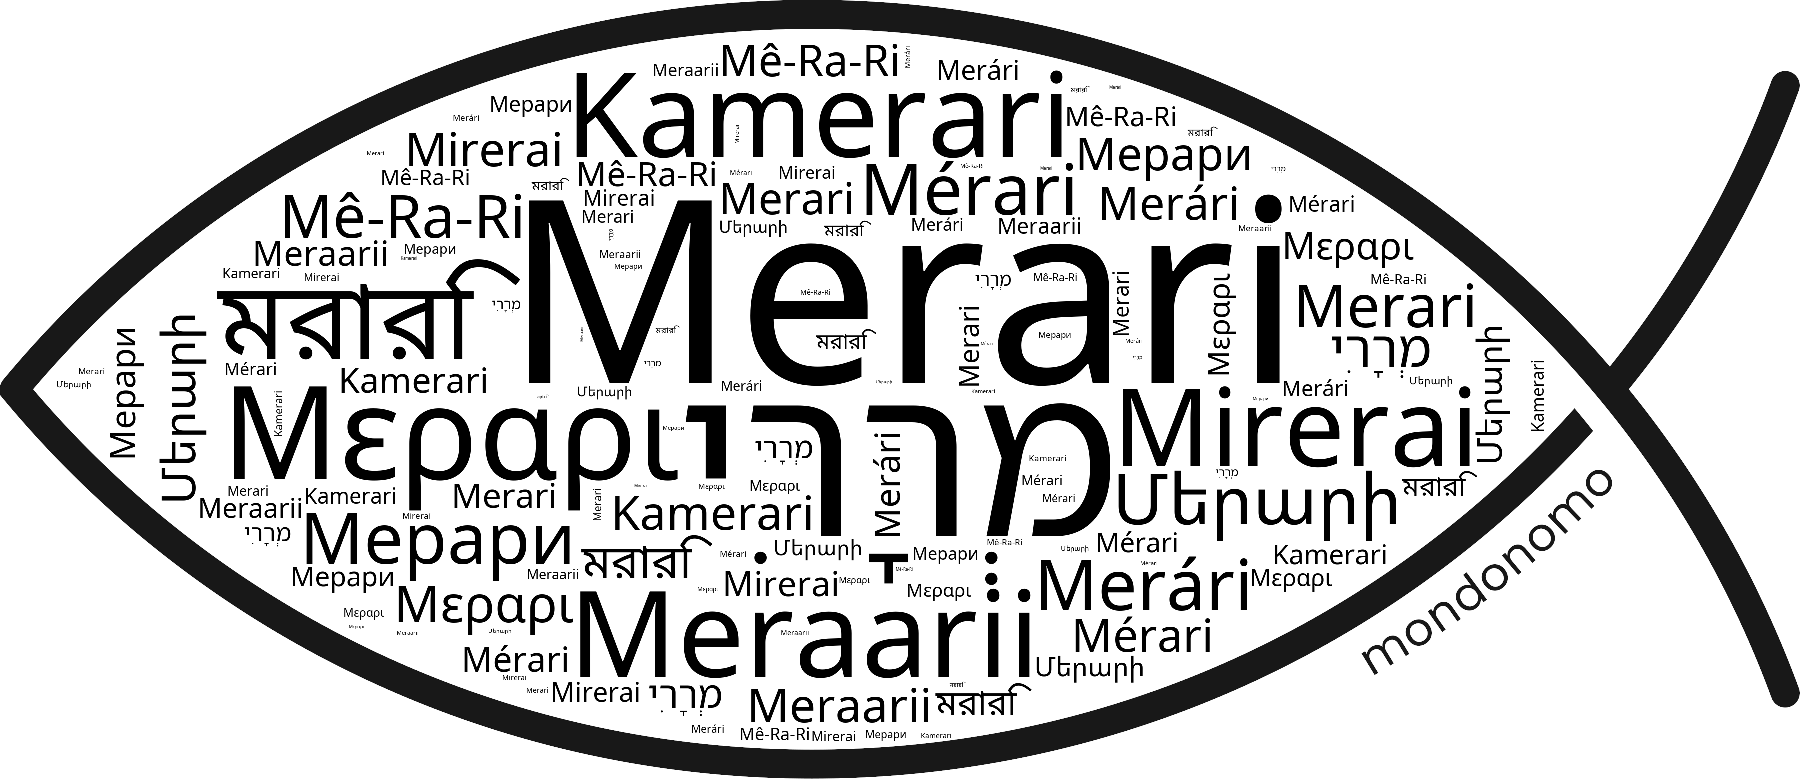 Name Merari in the world's Bibles